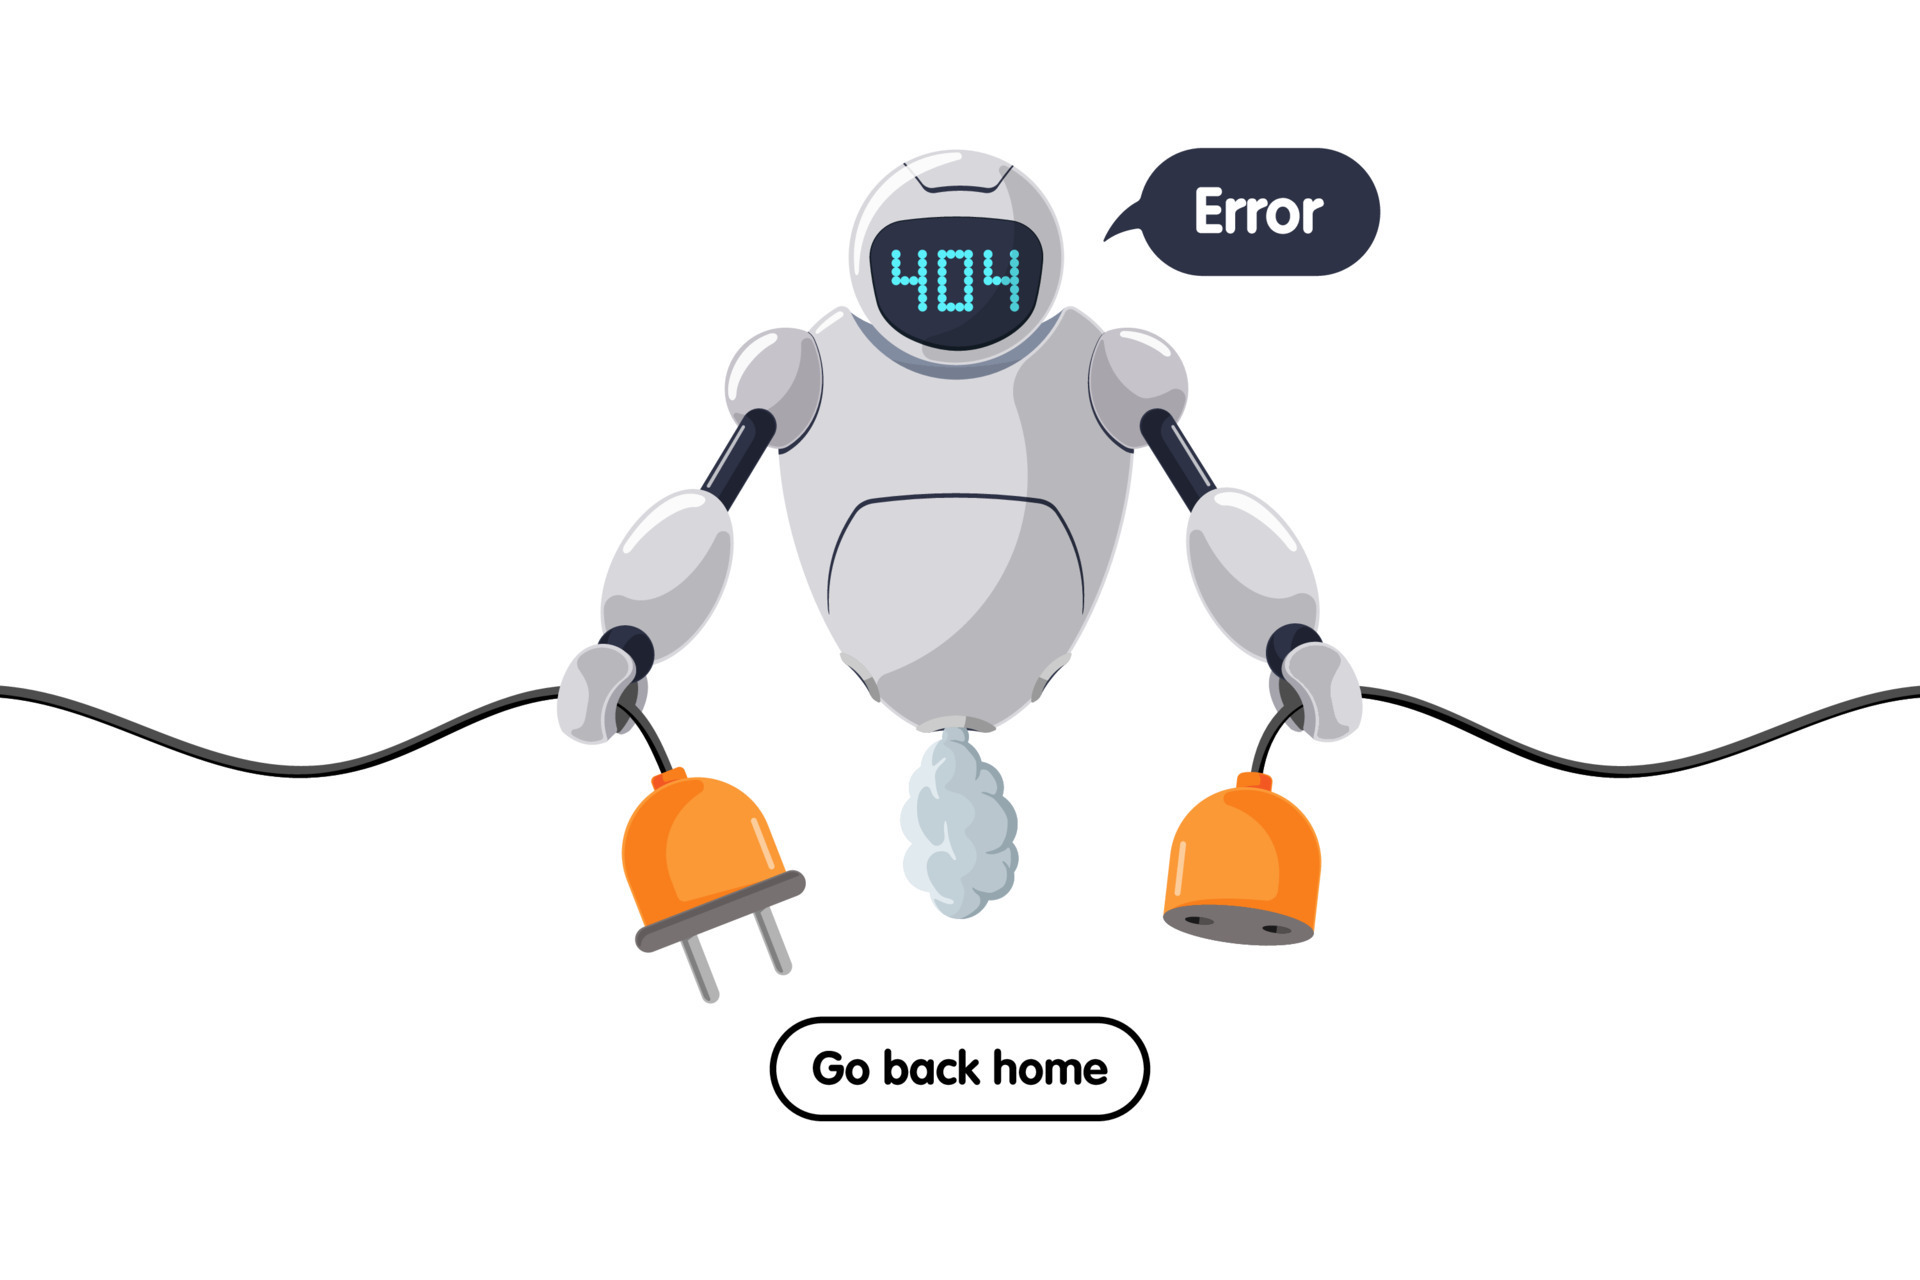 Website page not found. Wrong URL address 404. Broken robot character keeps socket off. Site crash on technical work. Web design with chatbot mascot. Online bot assistance failure. Eps 8568884